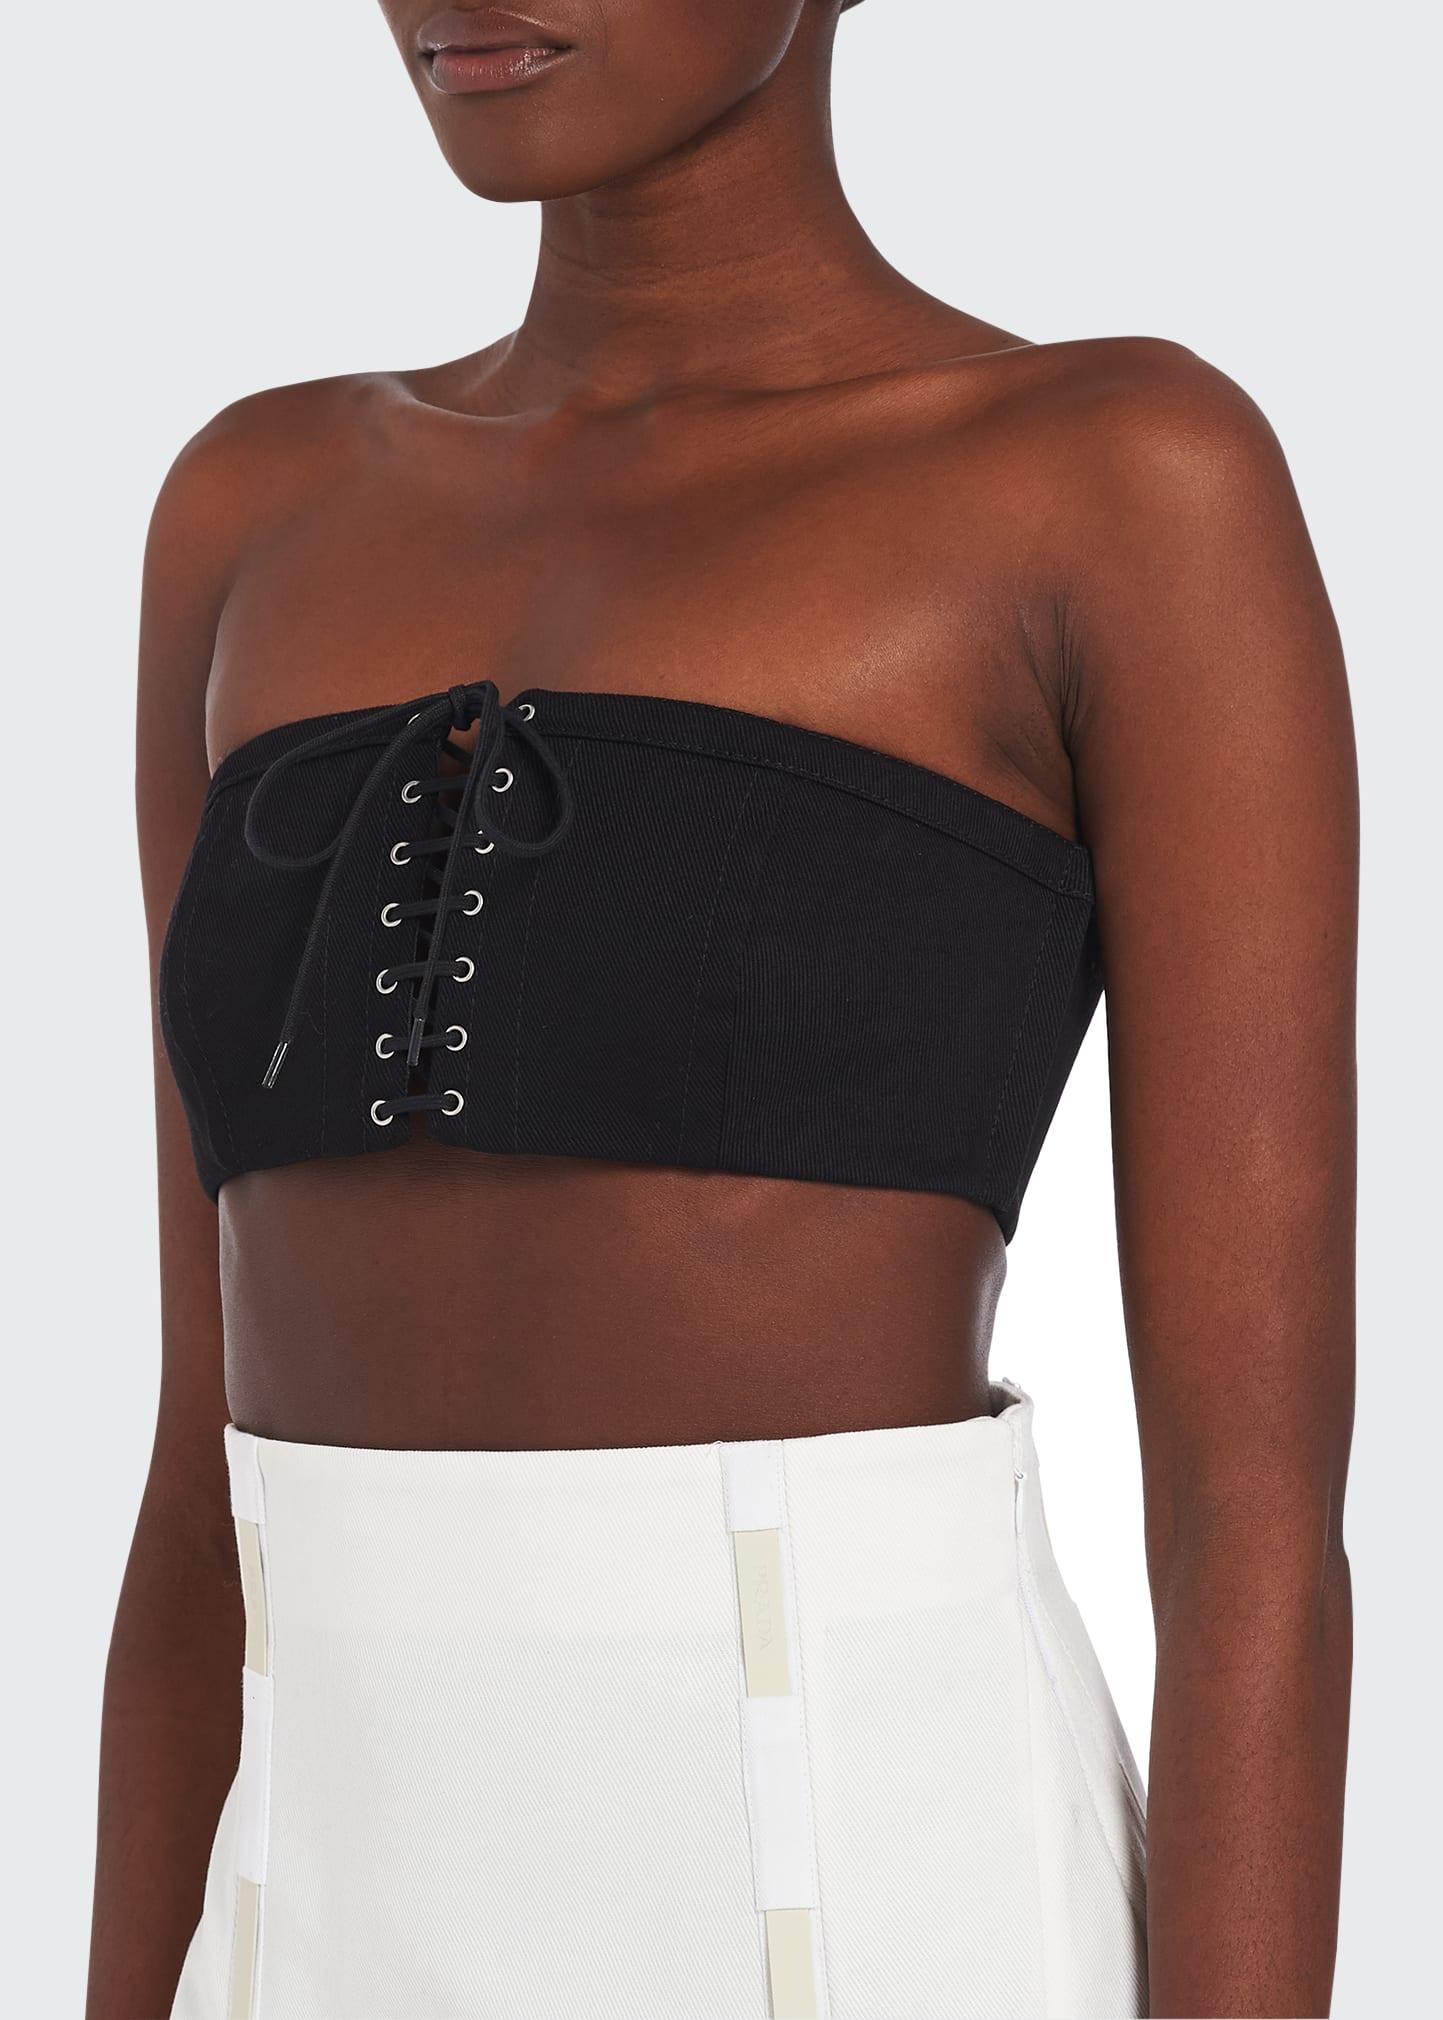 Prada Lace-up Bandeau Top in White | Lyst